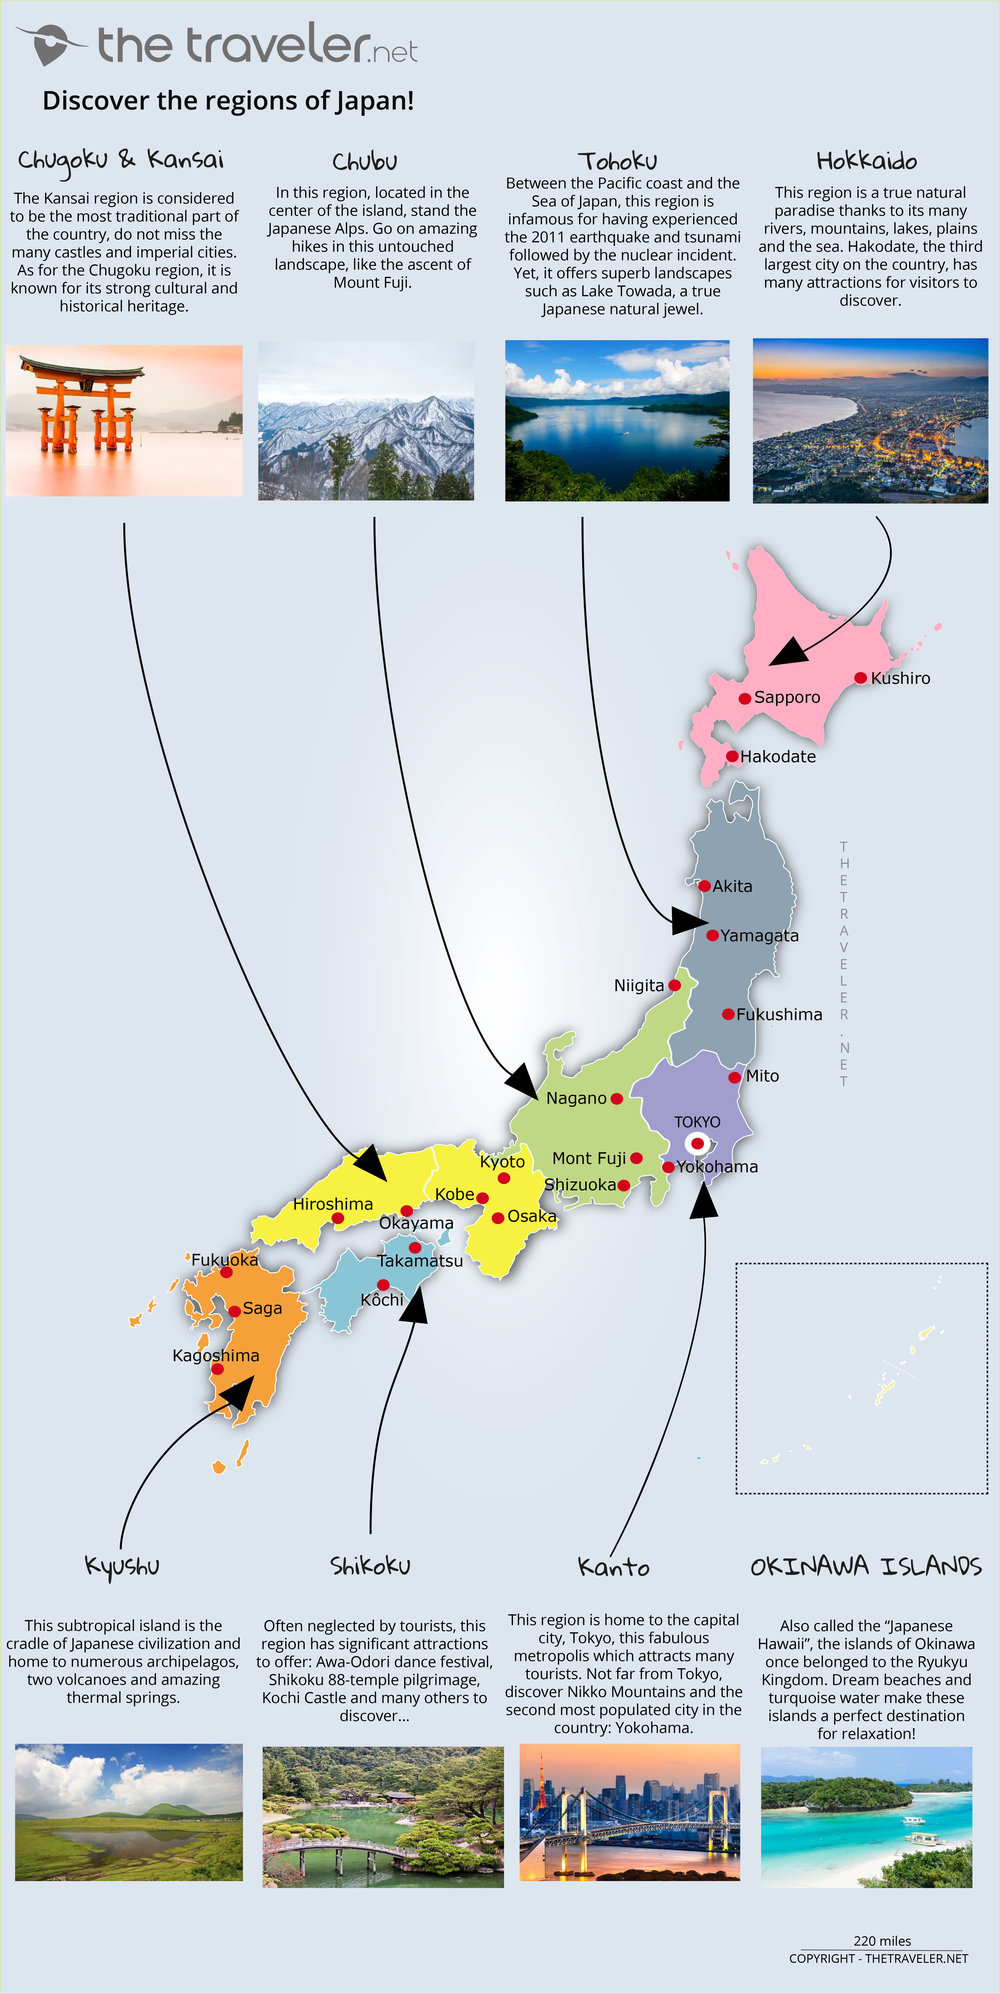 Bestof You Amazing Map Of Japan By Region In The World Check It Out Now